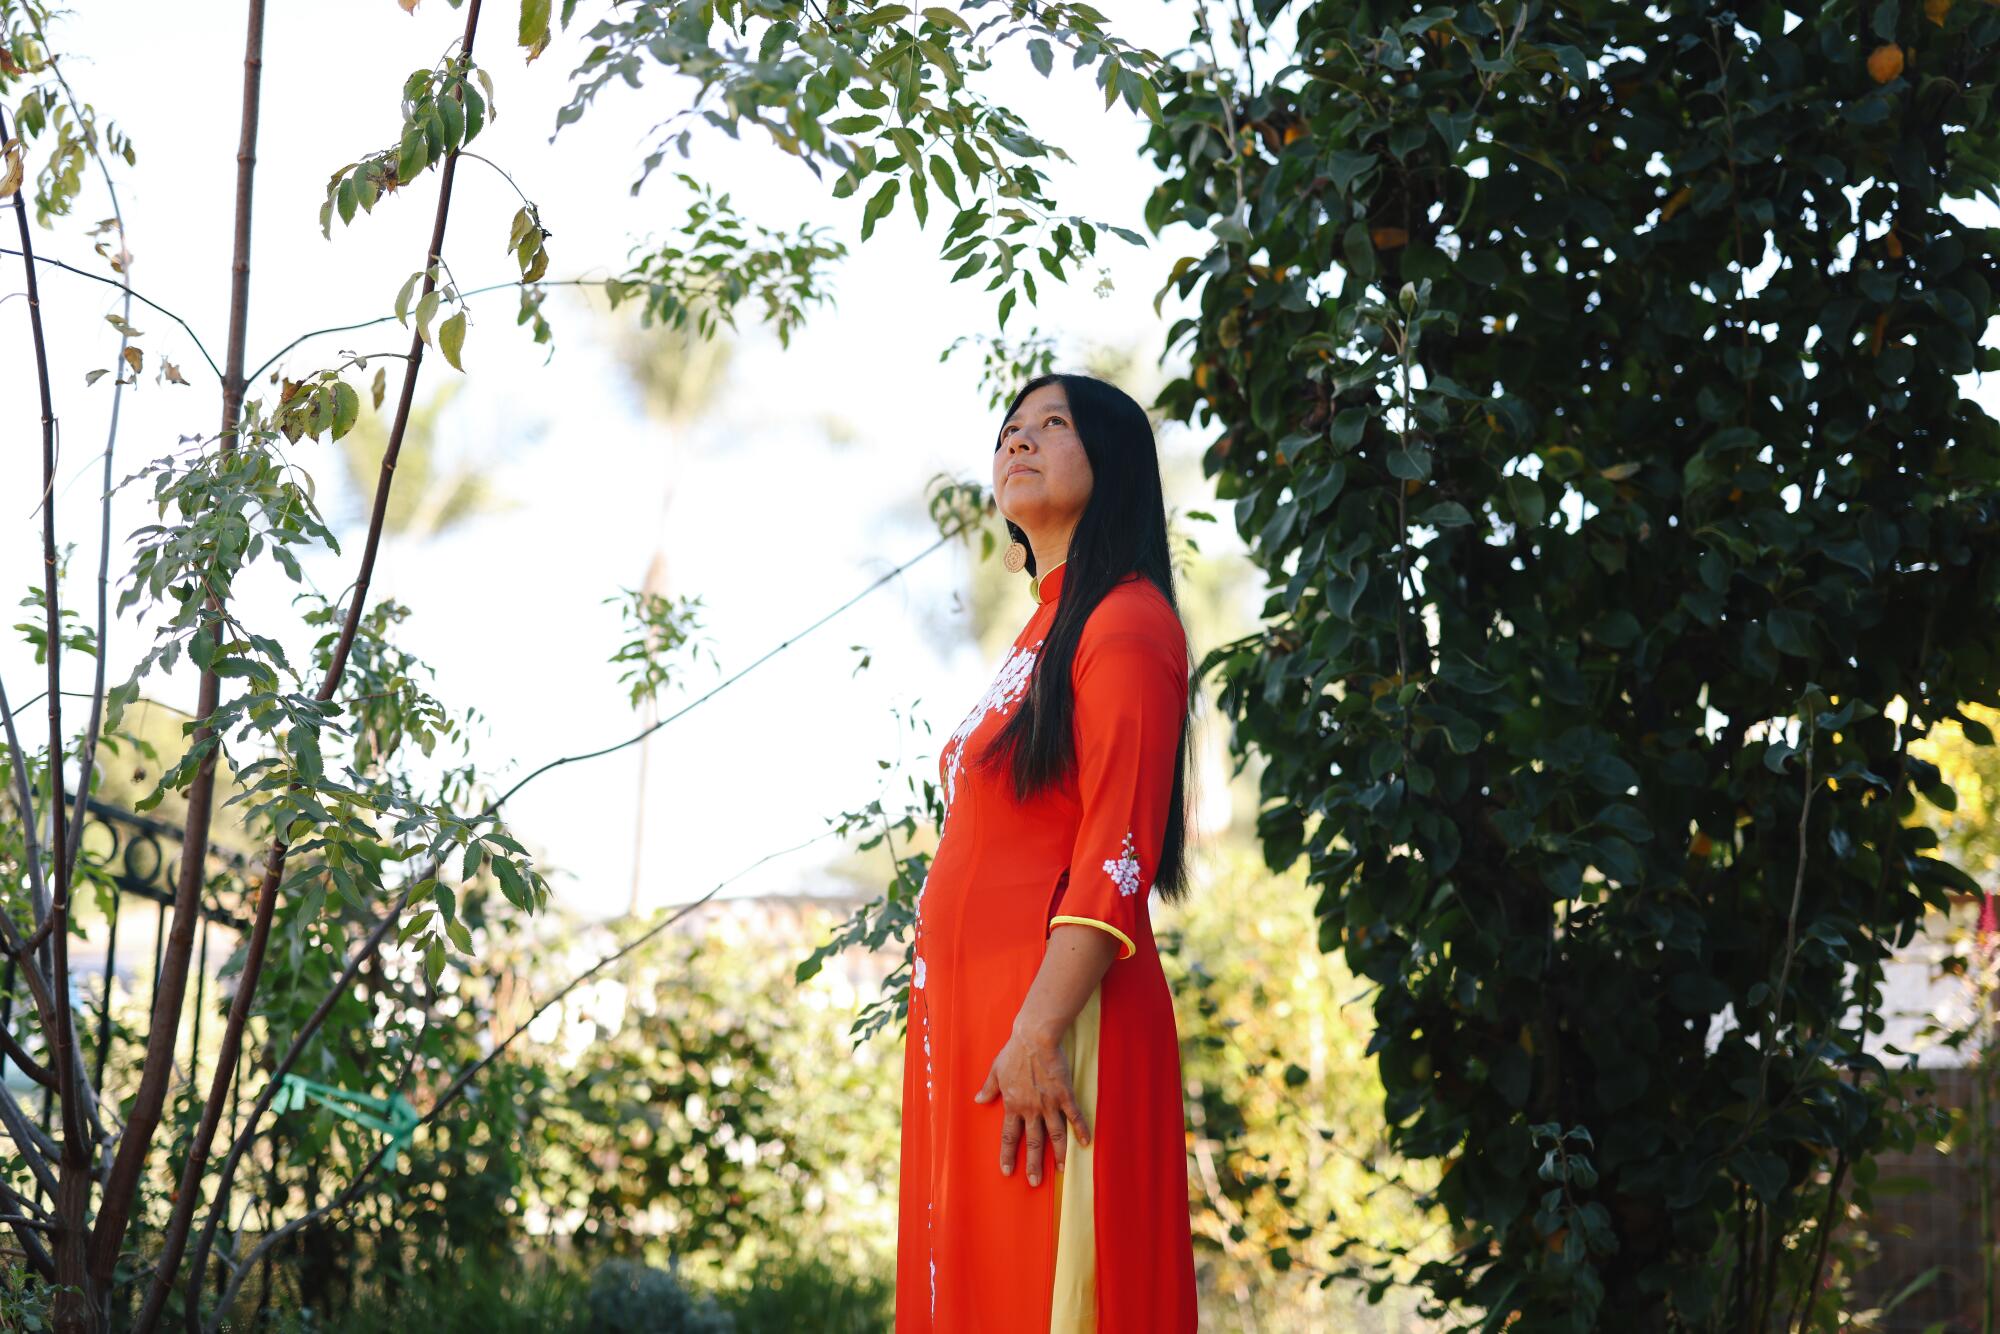 Teresa Mei Chuc stands in a bright red dress among green trees and looks into the distance. 